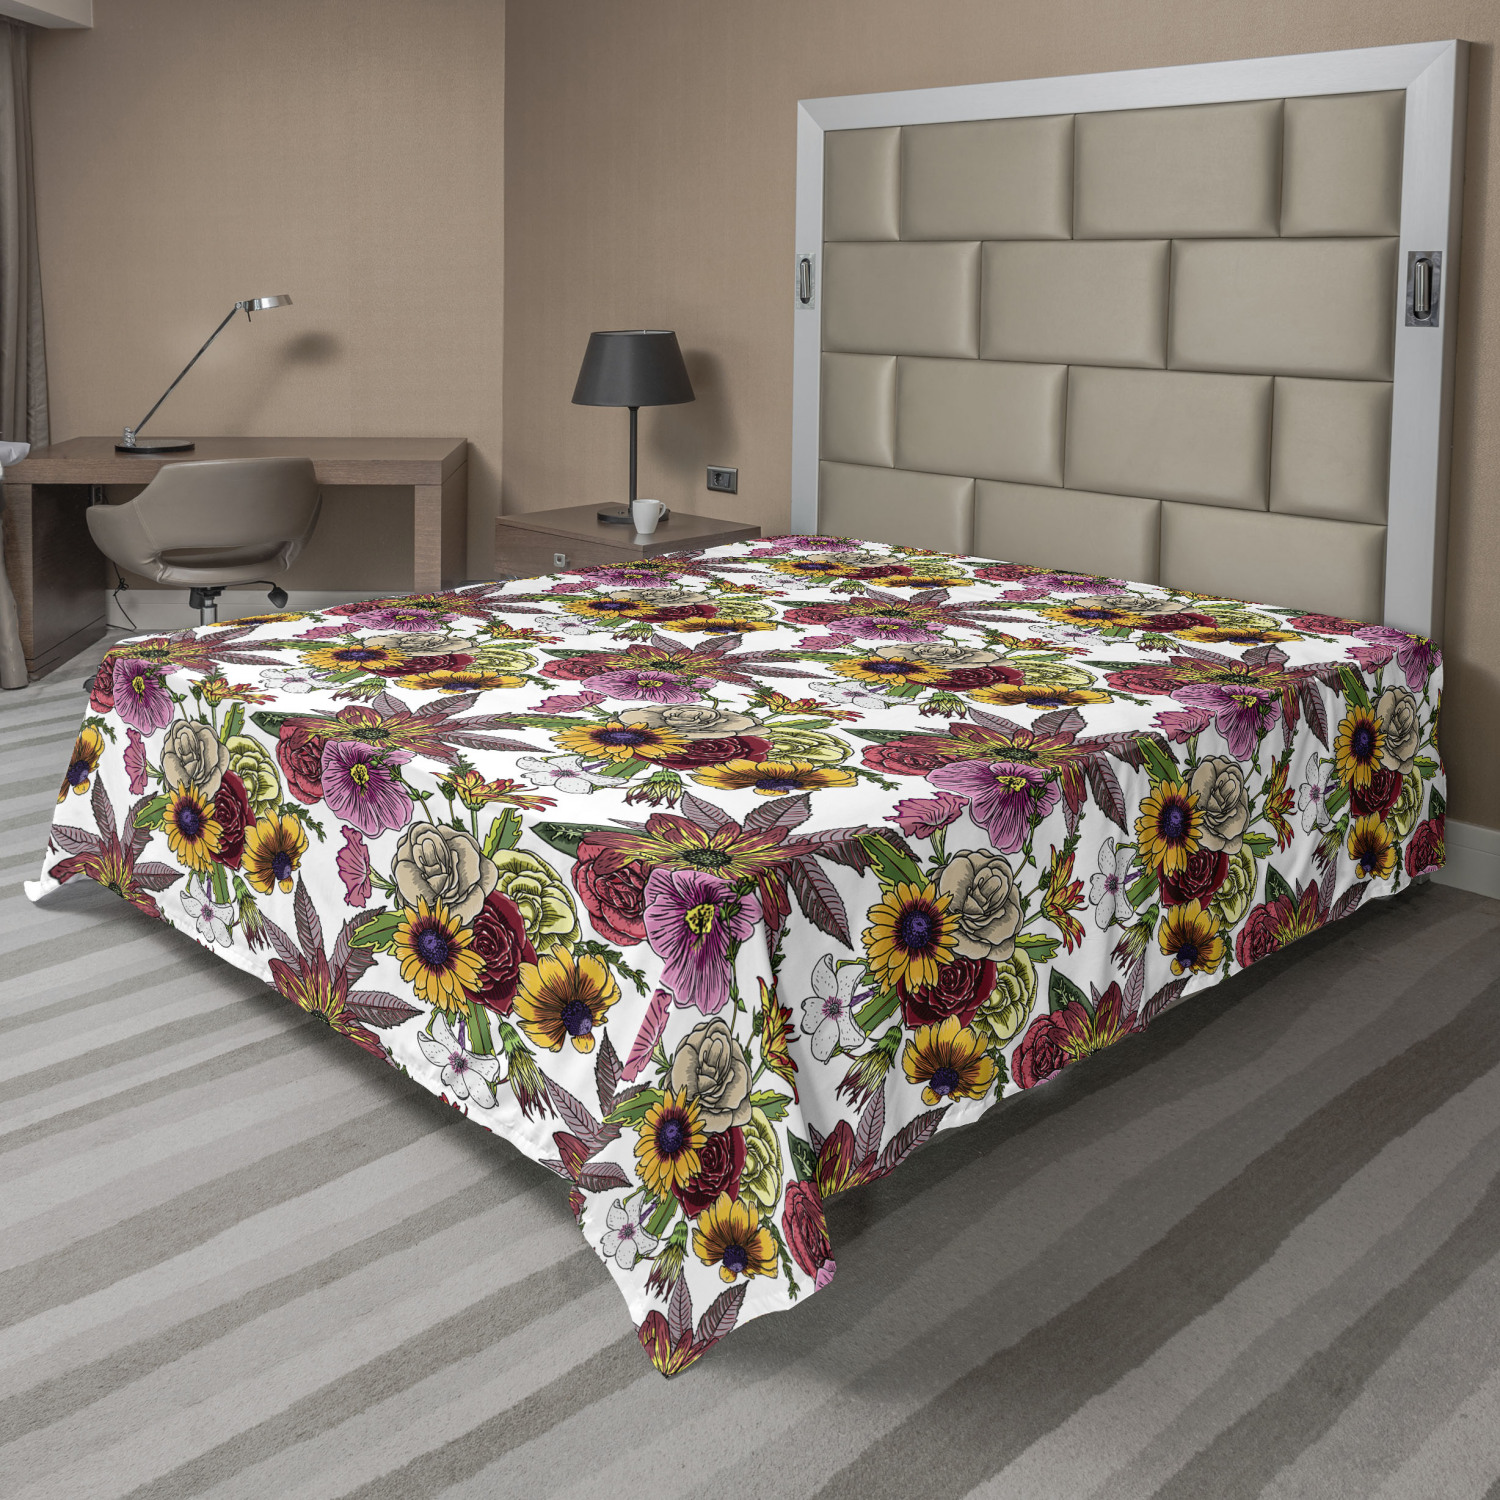 Details about   Ambesonne Aster Flat Sheet Top Sheet Decorative Bedding 6 Sizes 